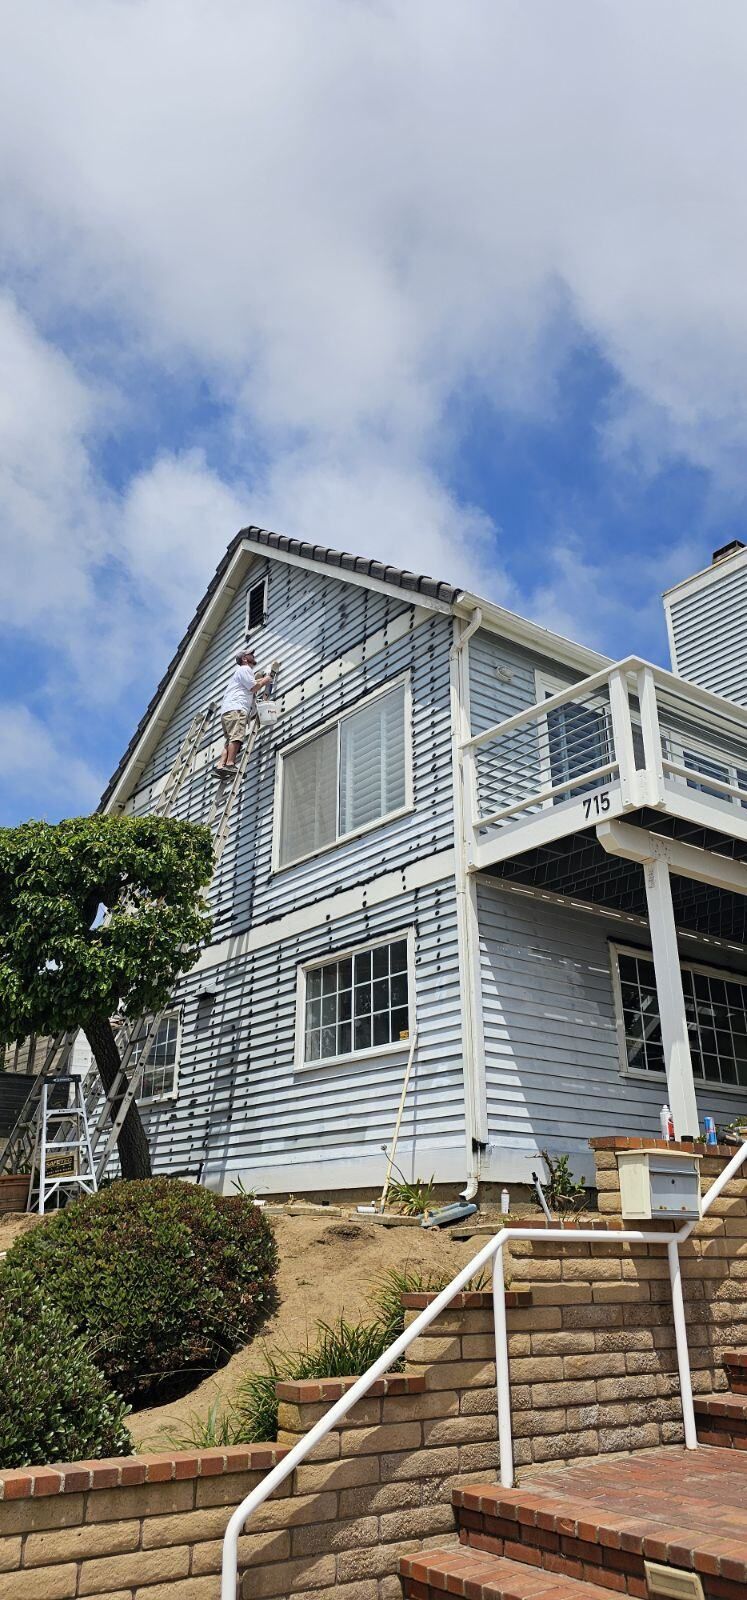 A man is standing on a ladder painting the roof of a house.